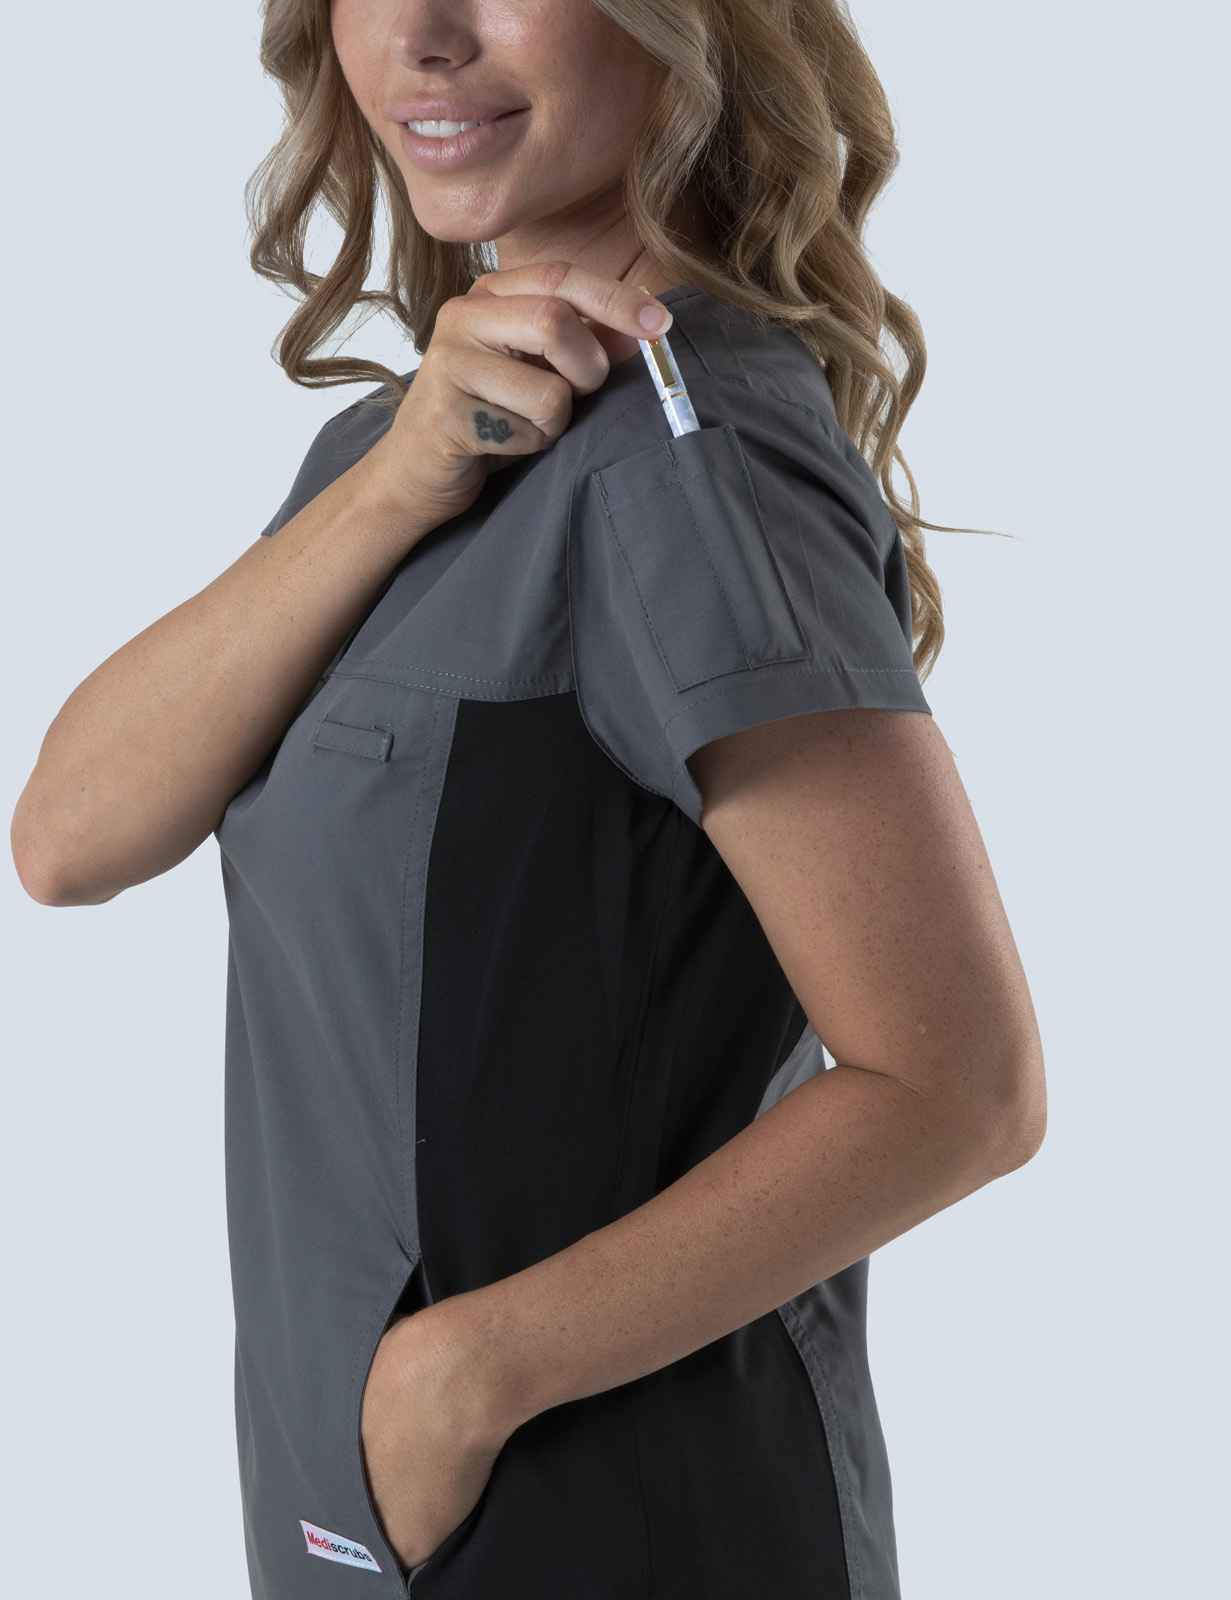 Pathology North (Women's Fit Spandex Scrub Top in Steel Grey and Cargo Pants in Black incl Logos)